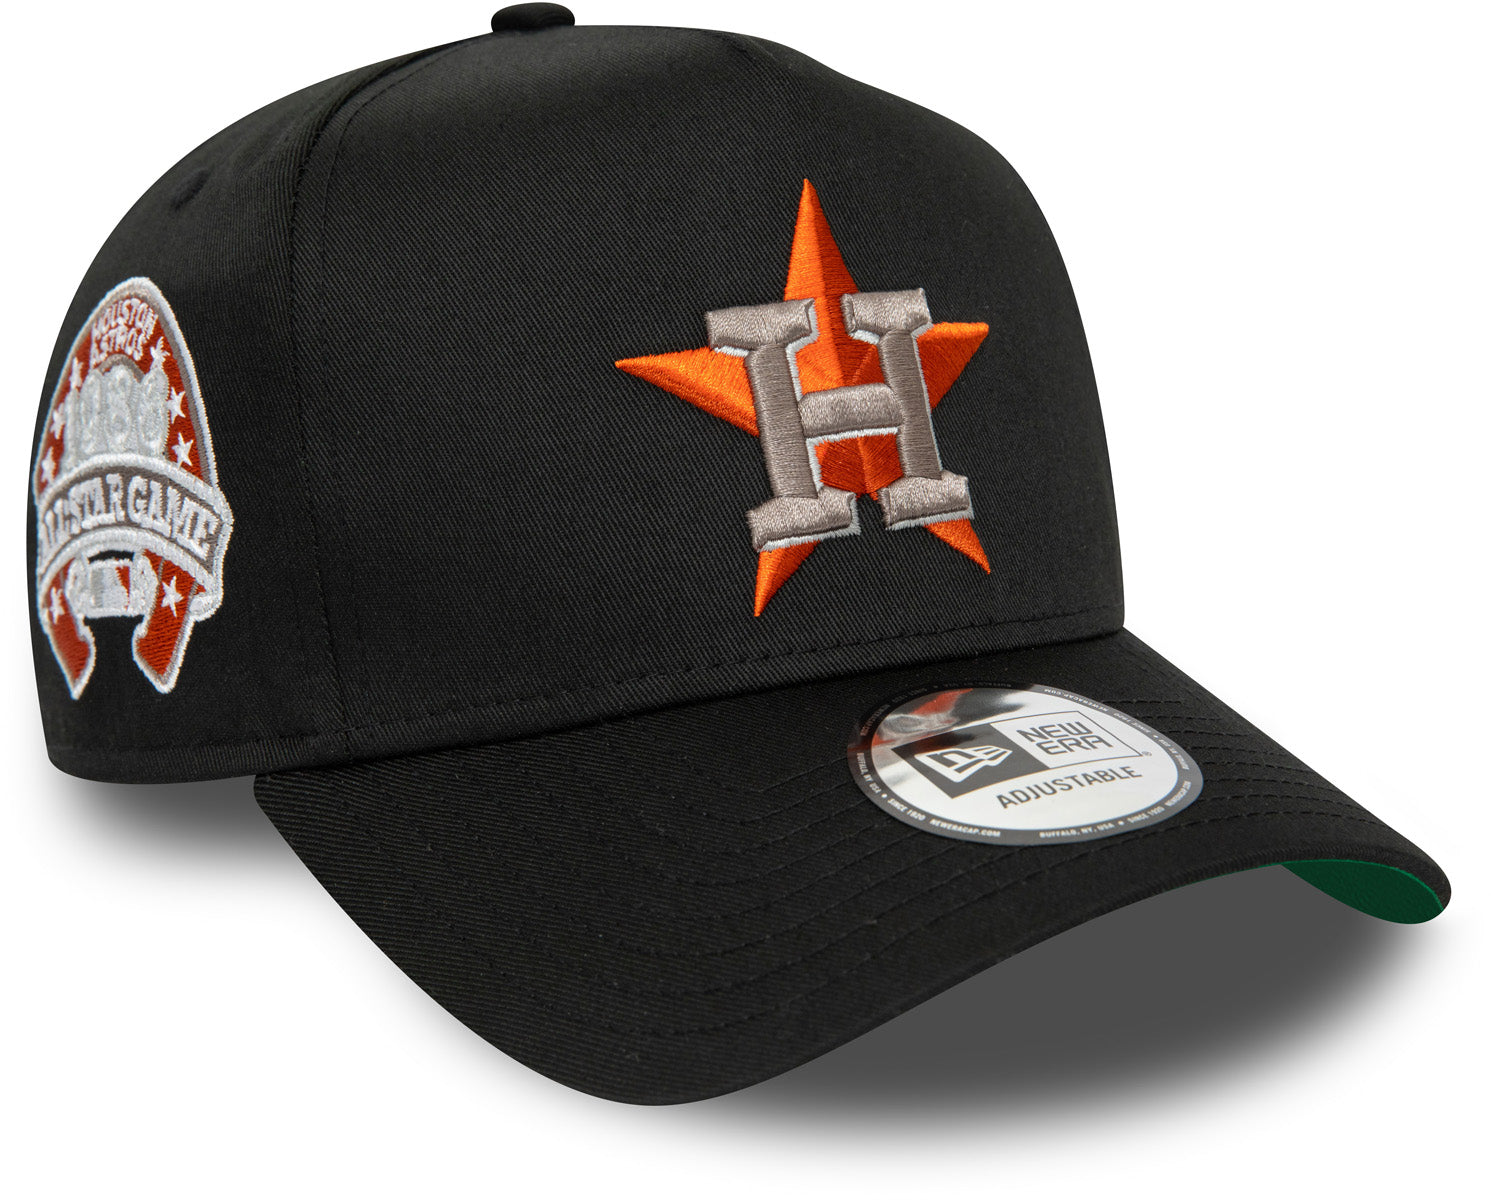 New Era Youth Houston Astros City Connect 9FIFTY Cap